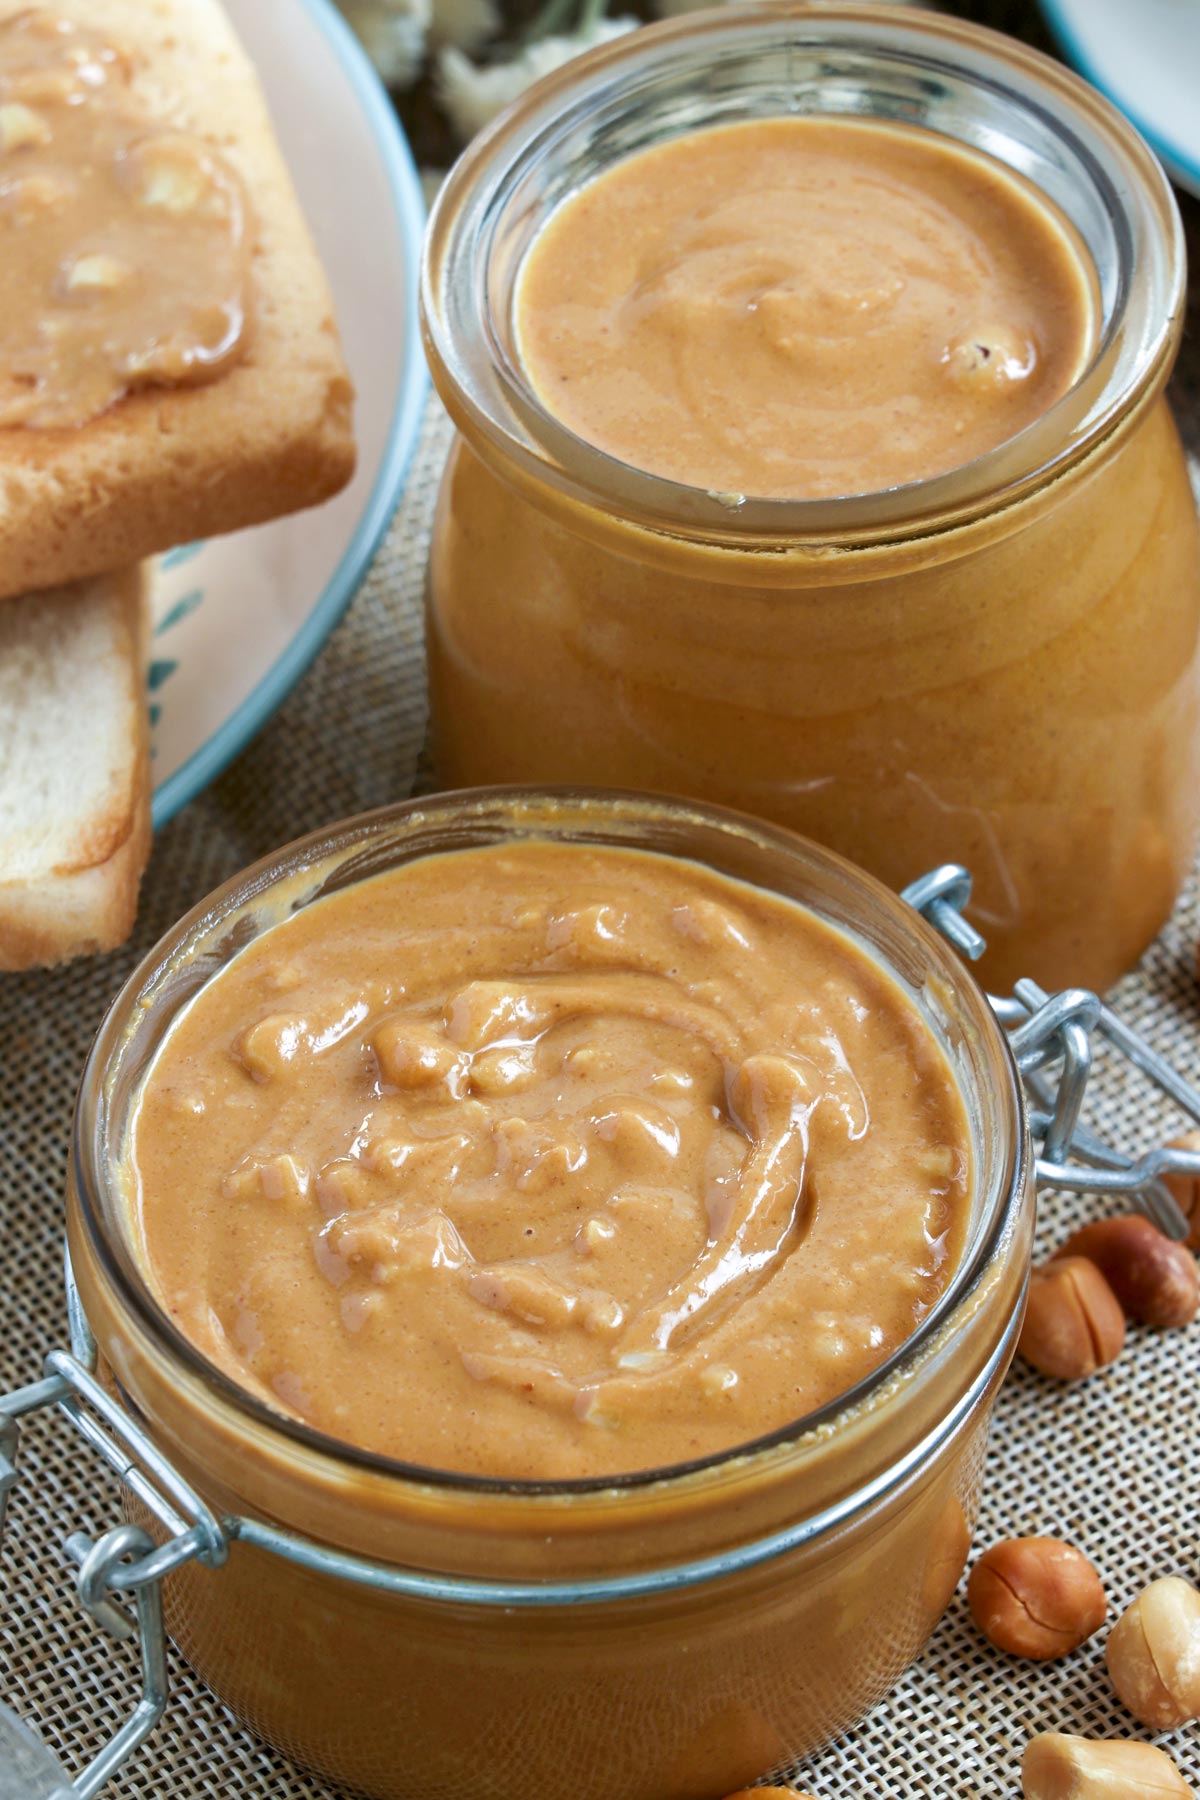 Chunky or smooth creamy homemade Peanut Butter in jars.